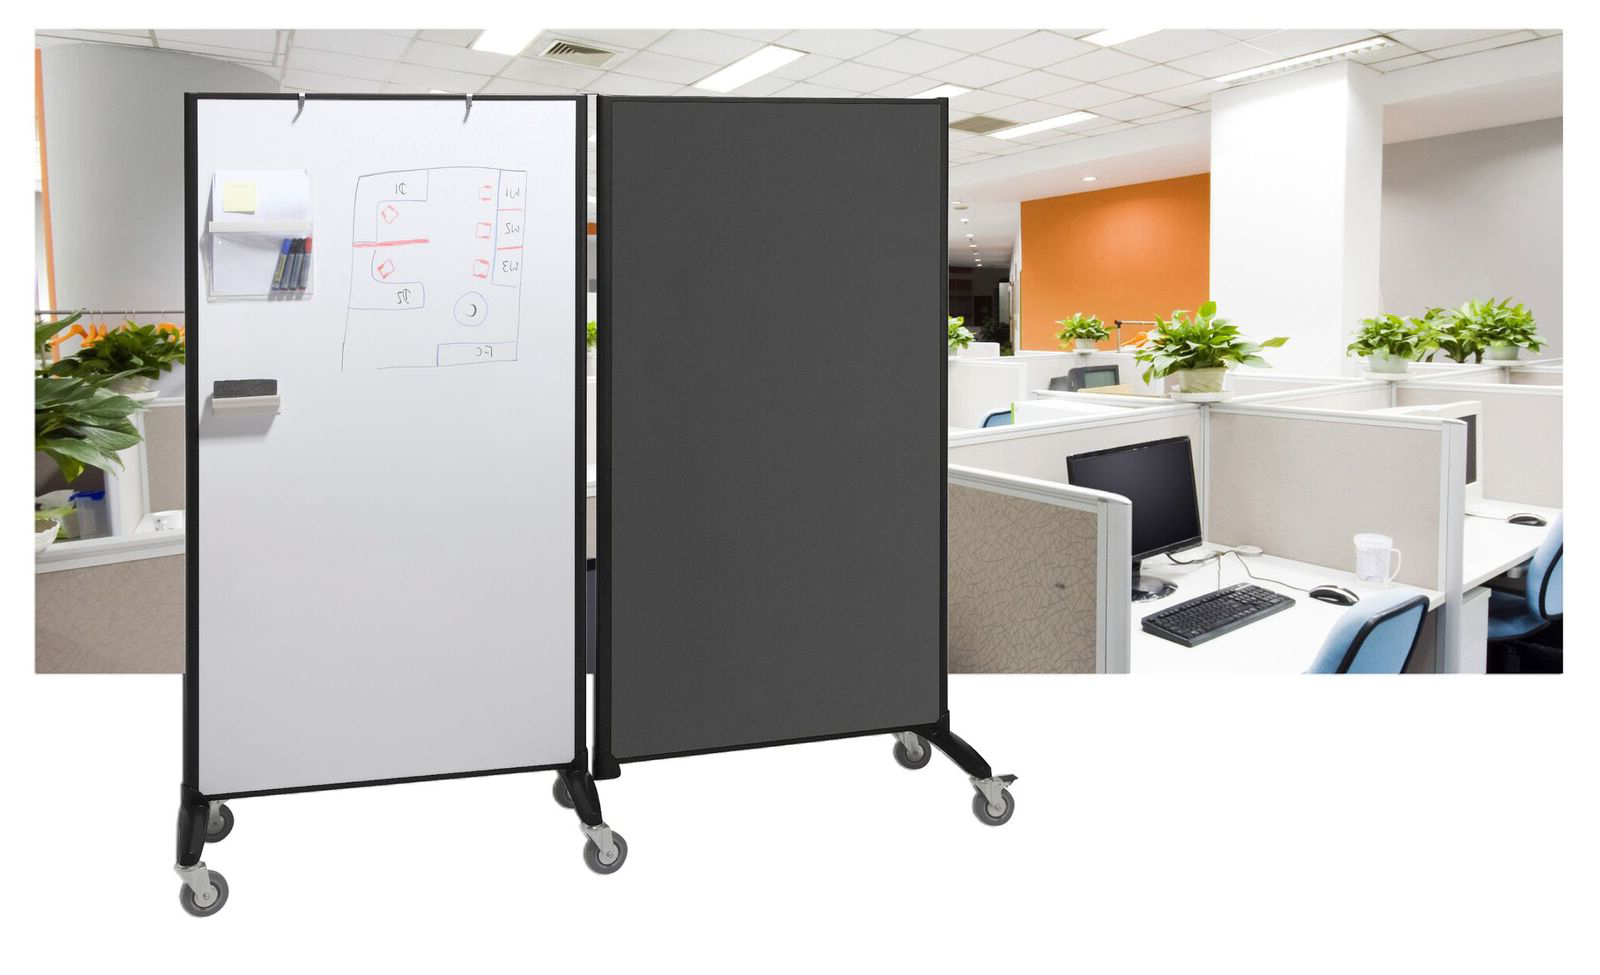 Whiteboard Pinboard Room Divider